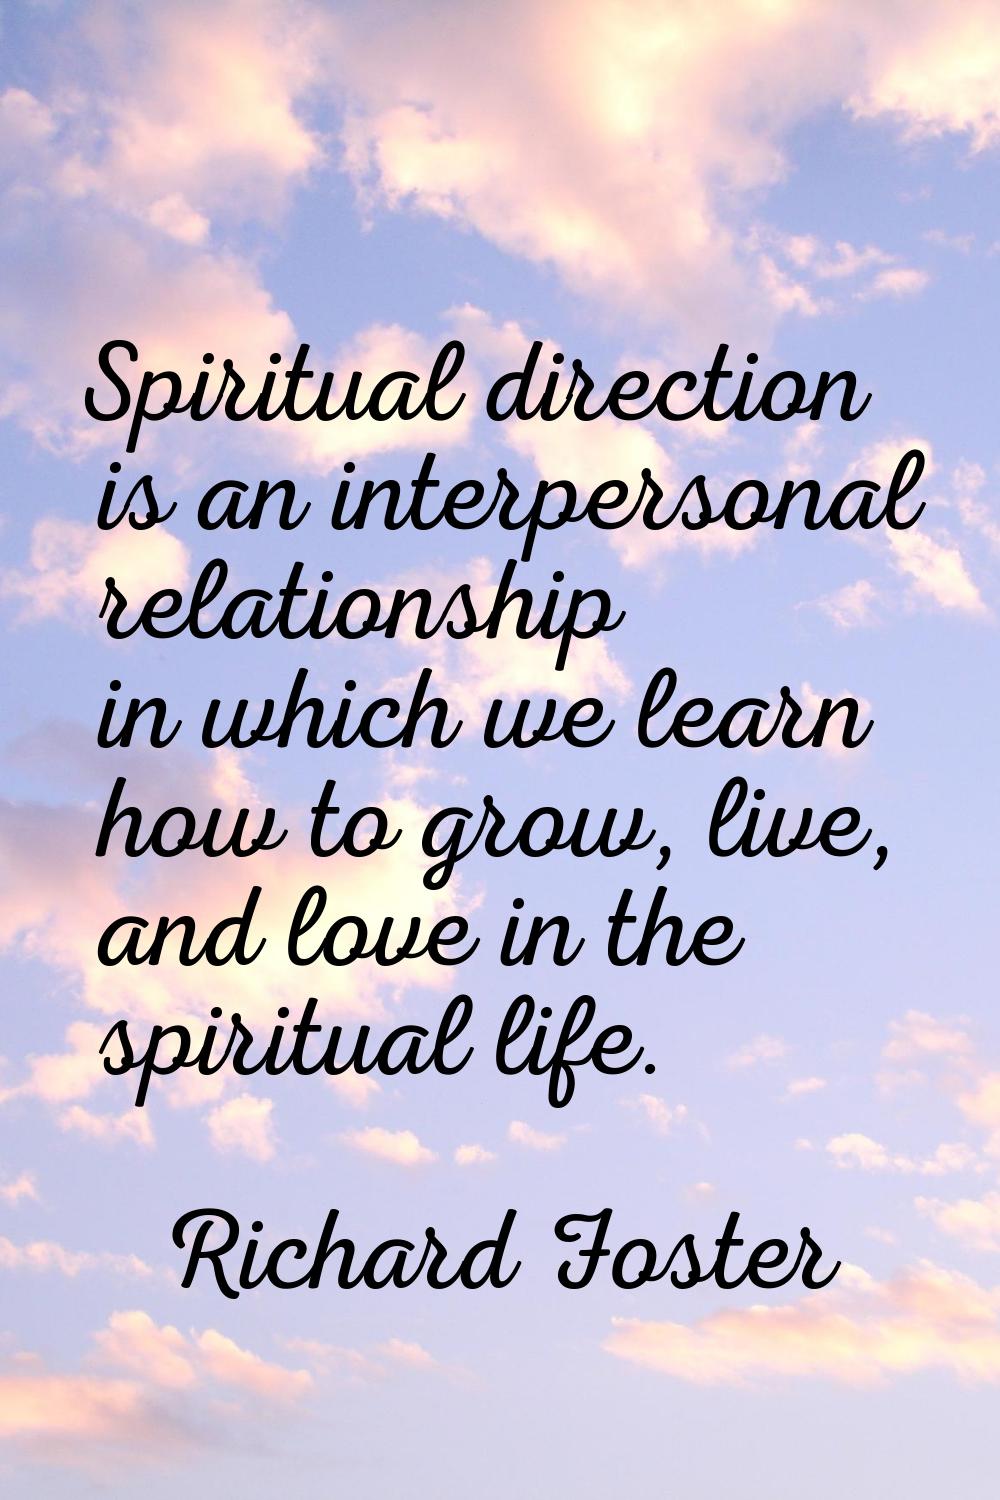 Spiritual direction is an interpersonal relationship in which we learn how to grow, live, and love 